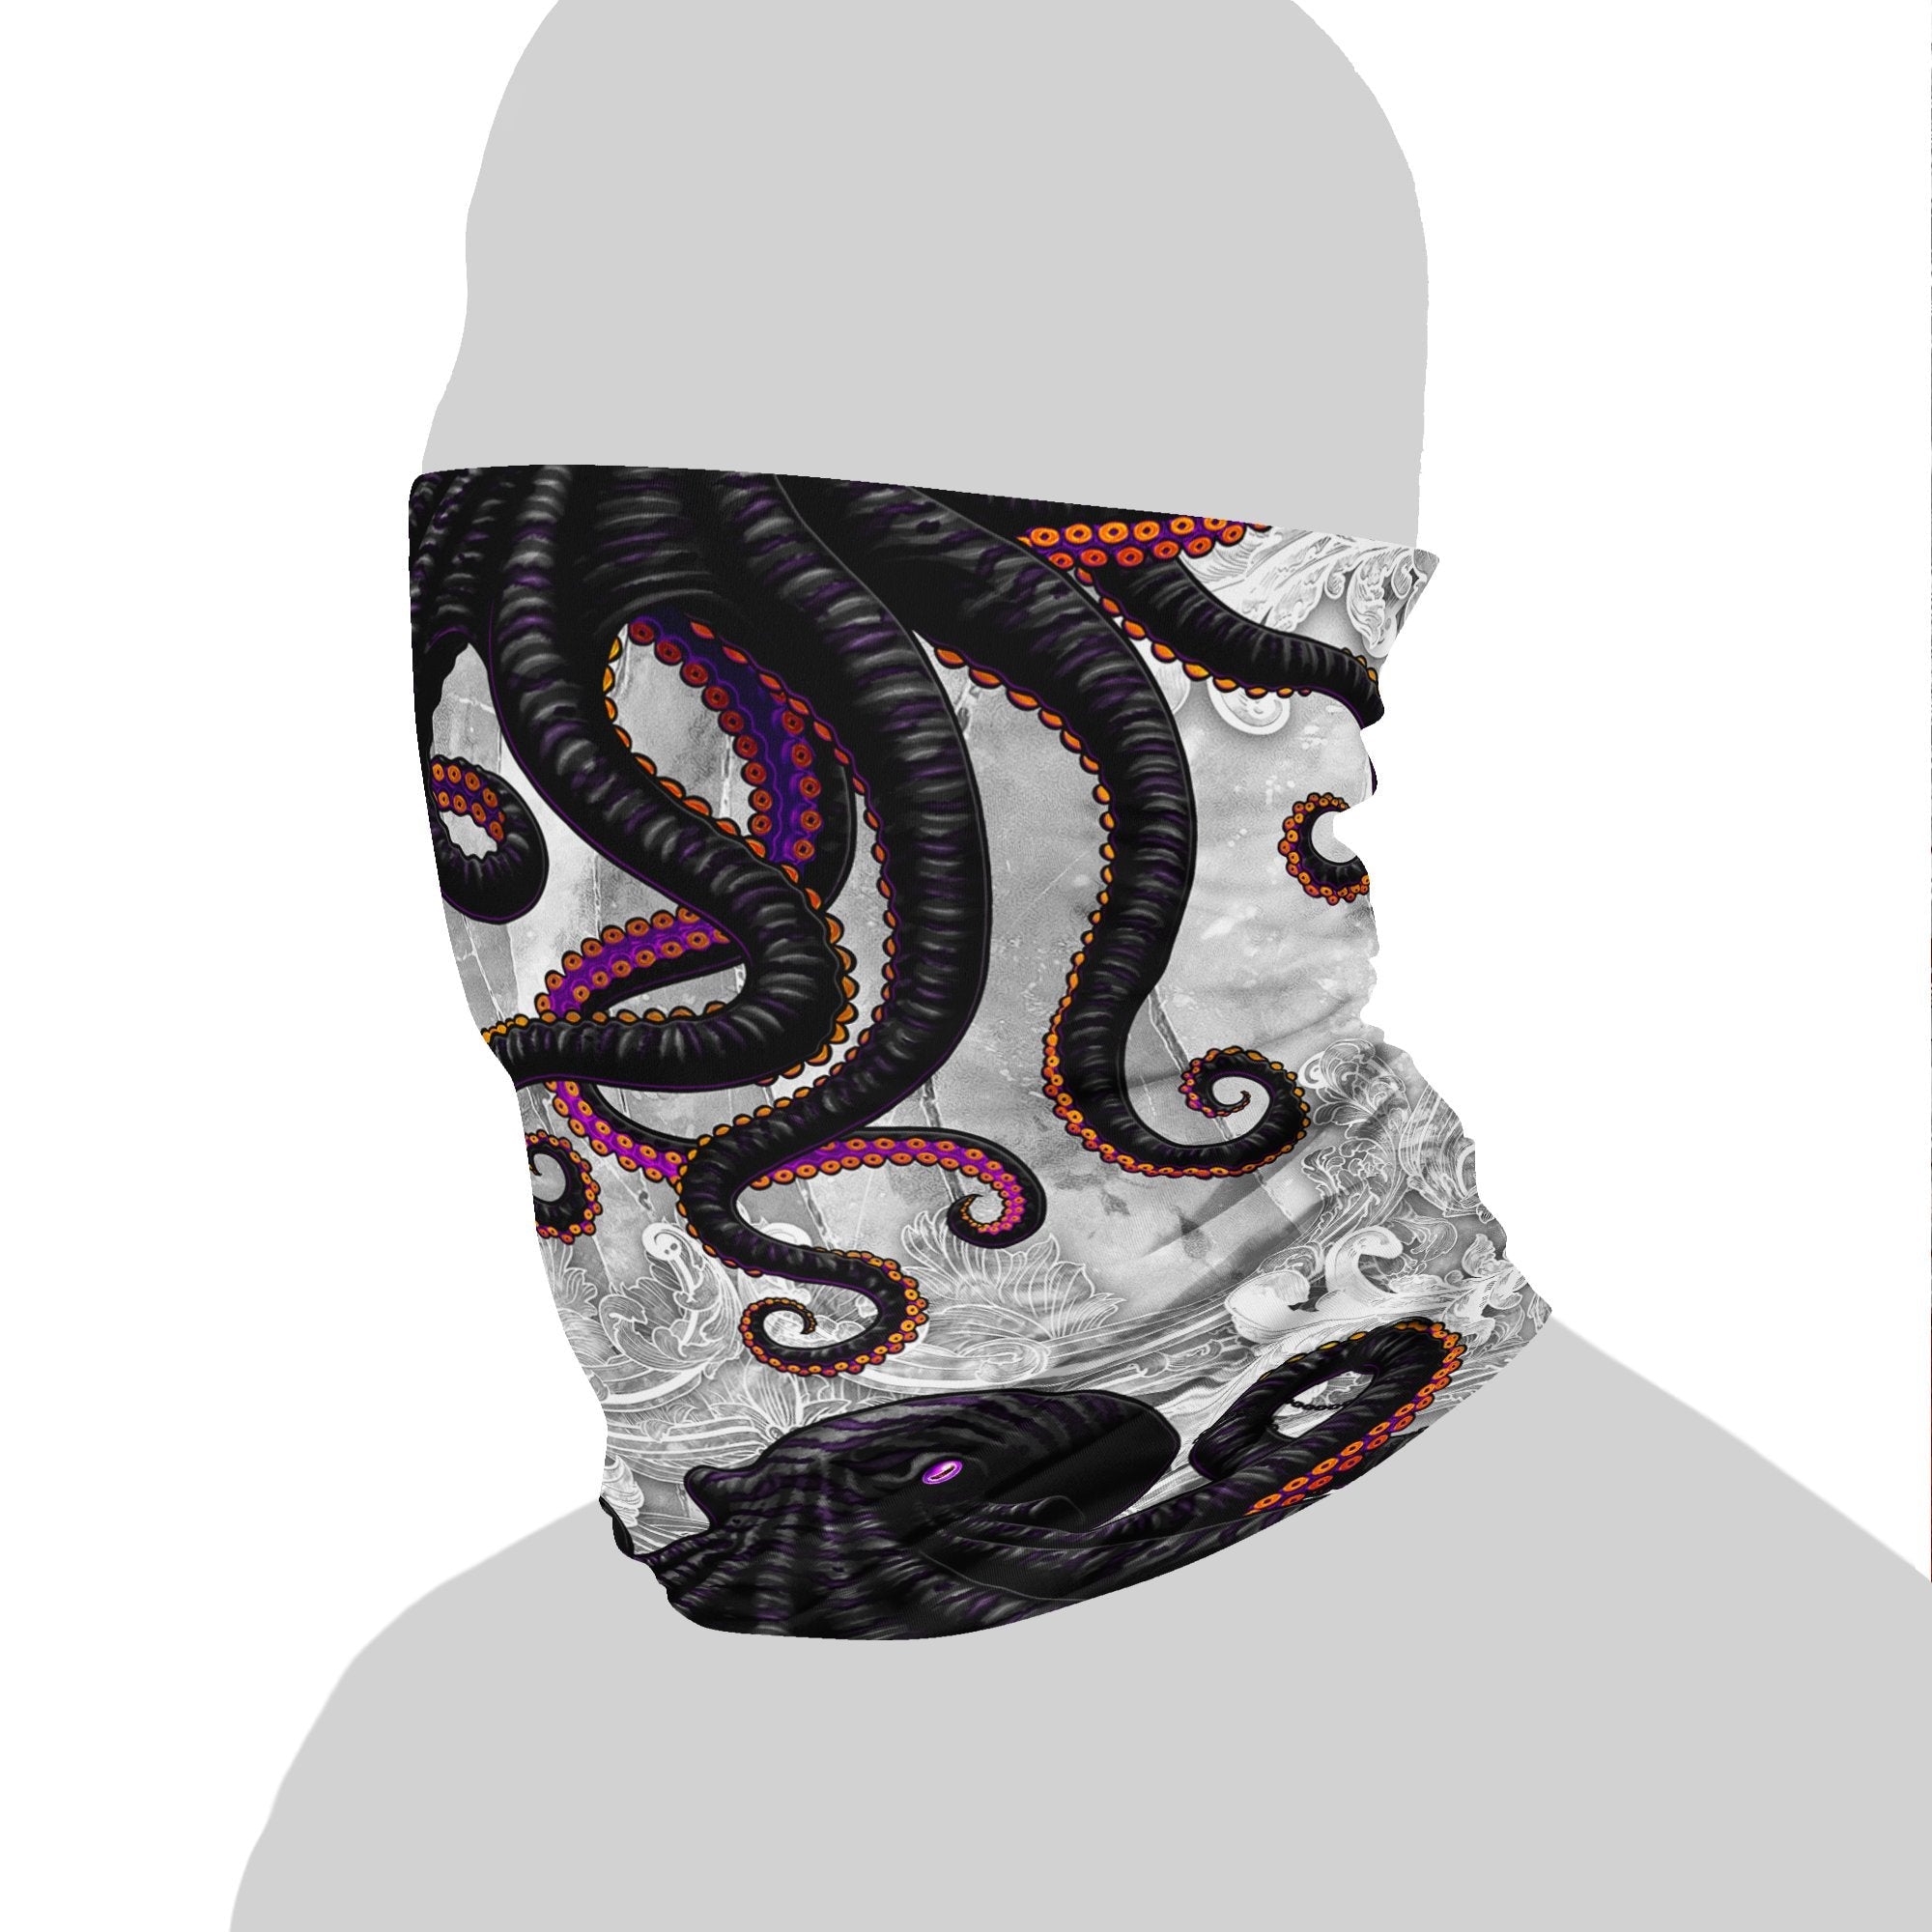 Tentacles Neck Gaiter, Face Mask, Head Covering, Octopus Art, Indie Outfit - White Goth - Abysm Internal